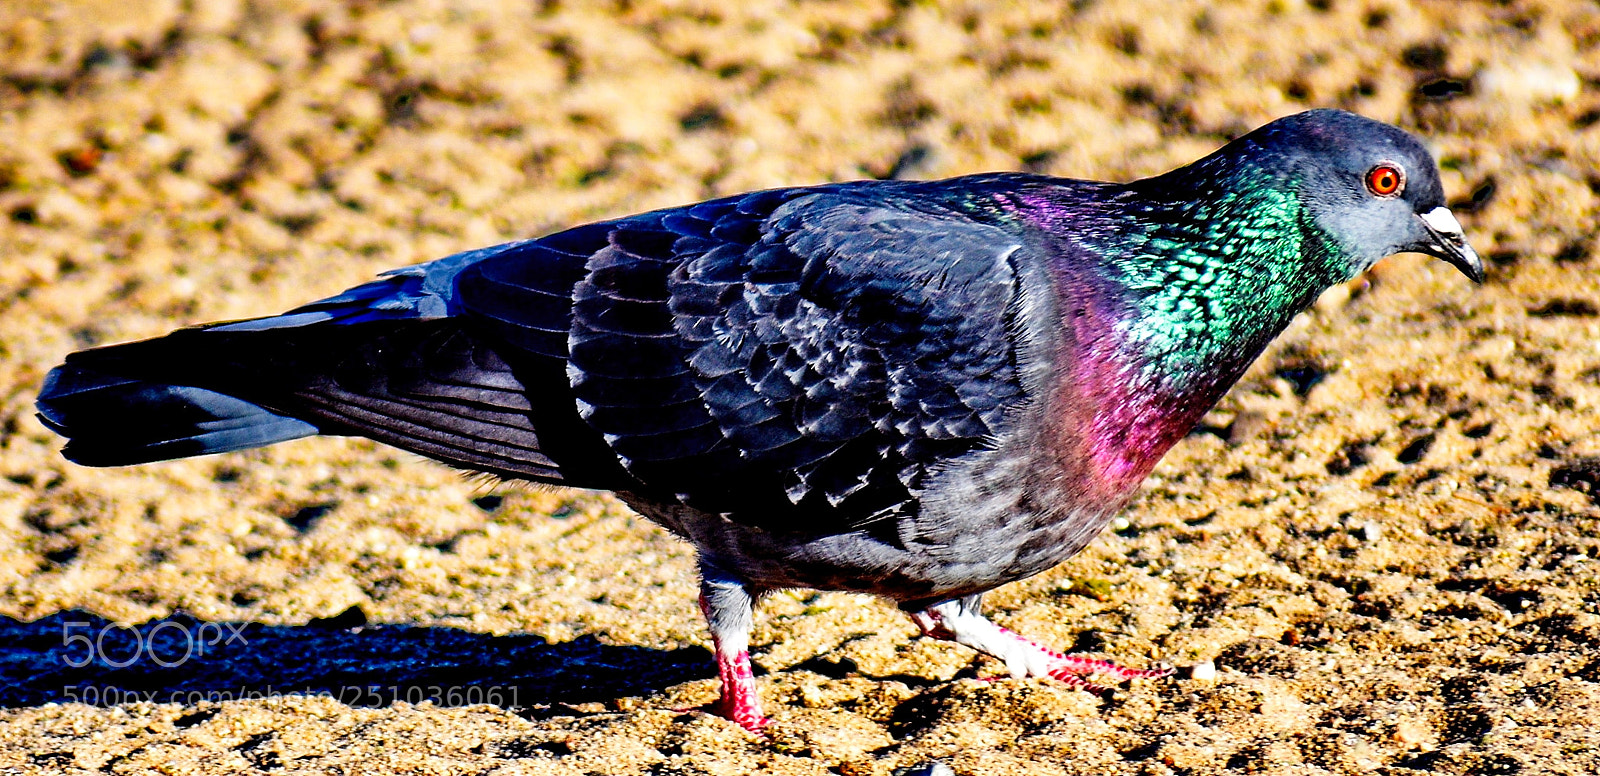 Nikon D7200 sample photo. Pigeon walking in the photography